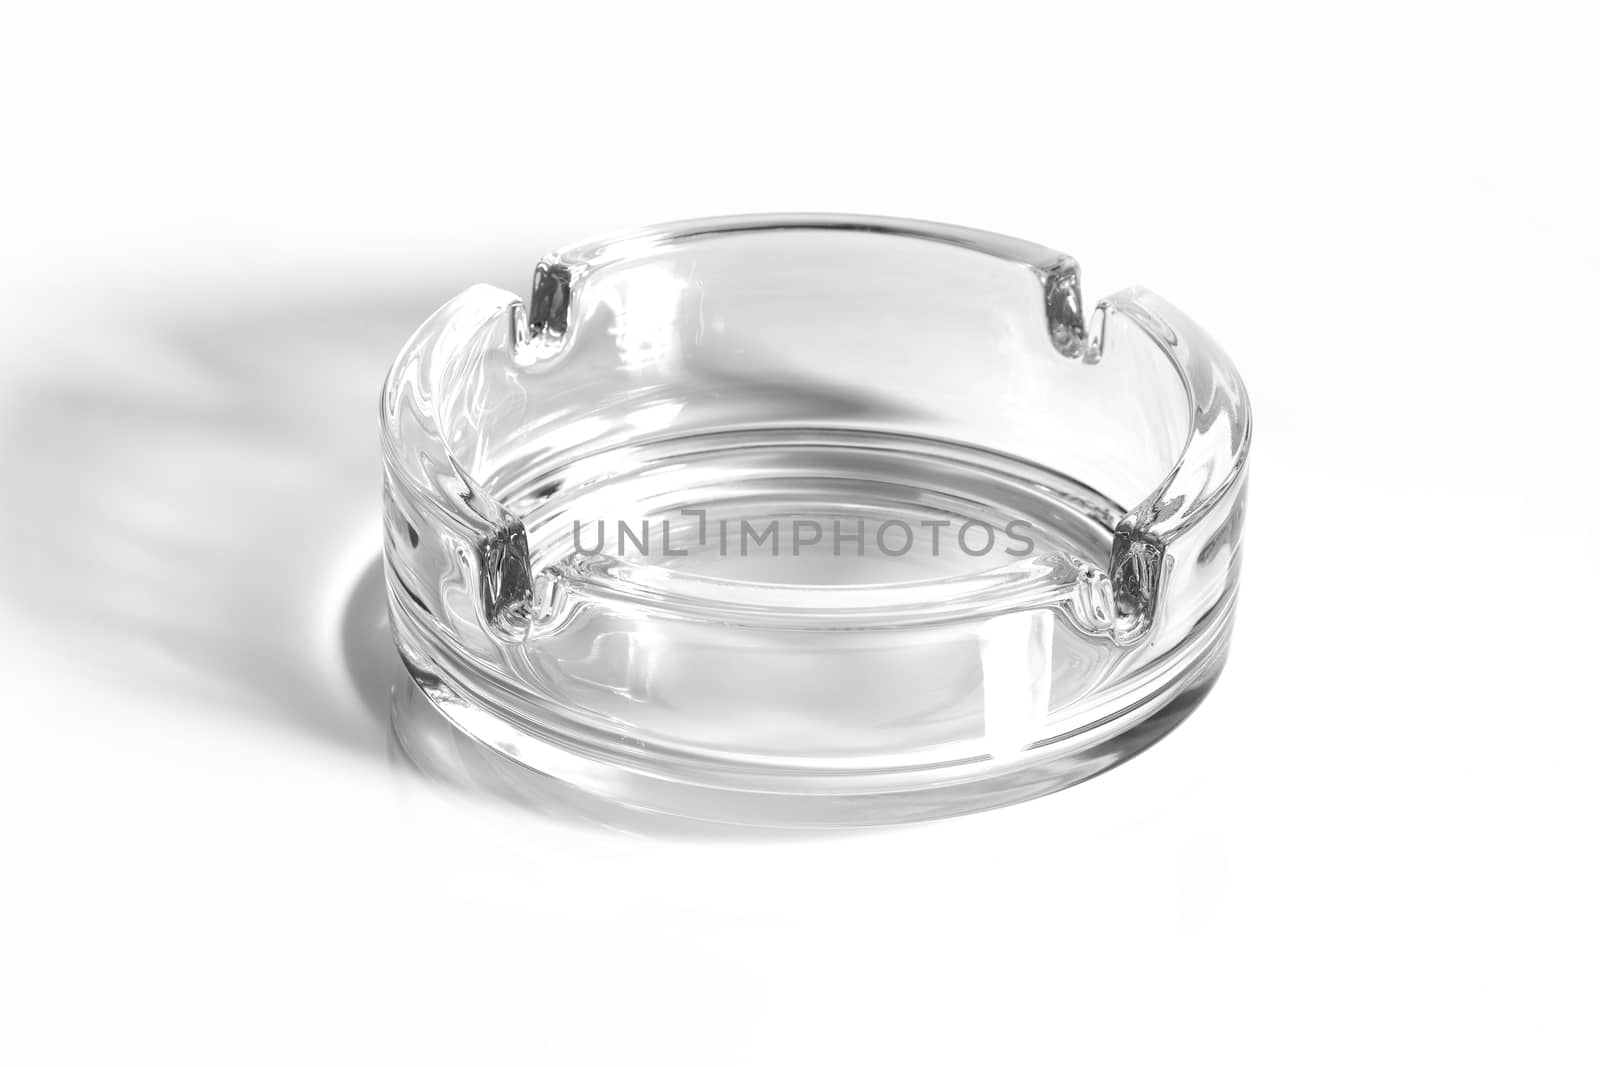 A glass ash tray on white background with shadow